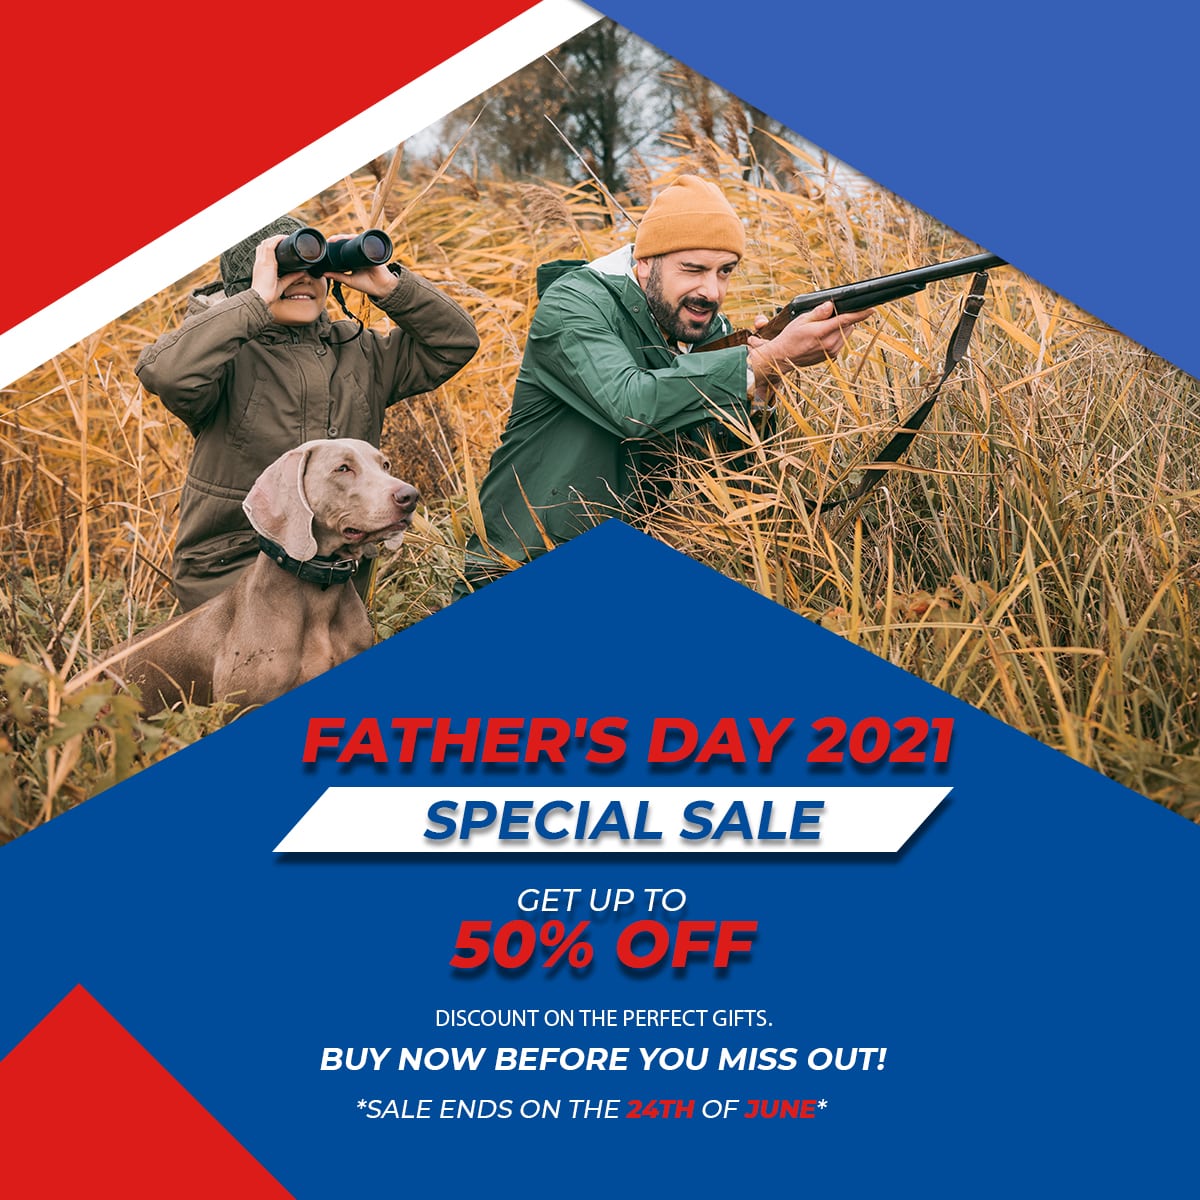 Father's Day Special Sale